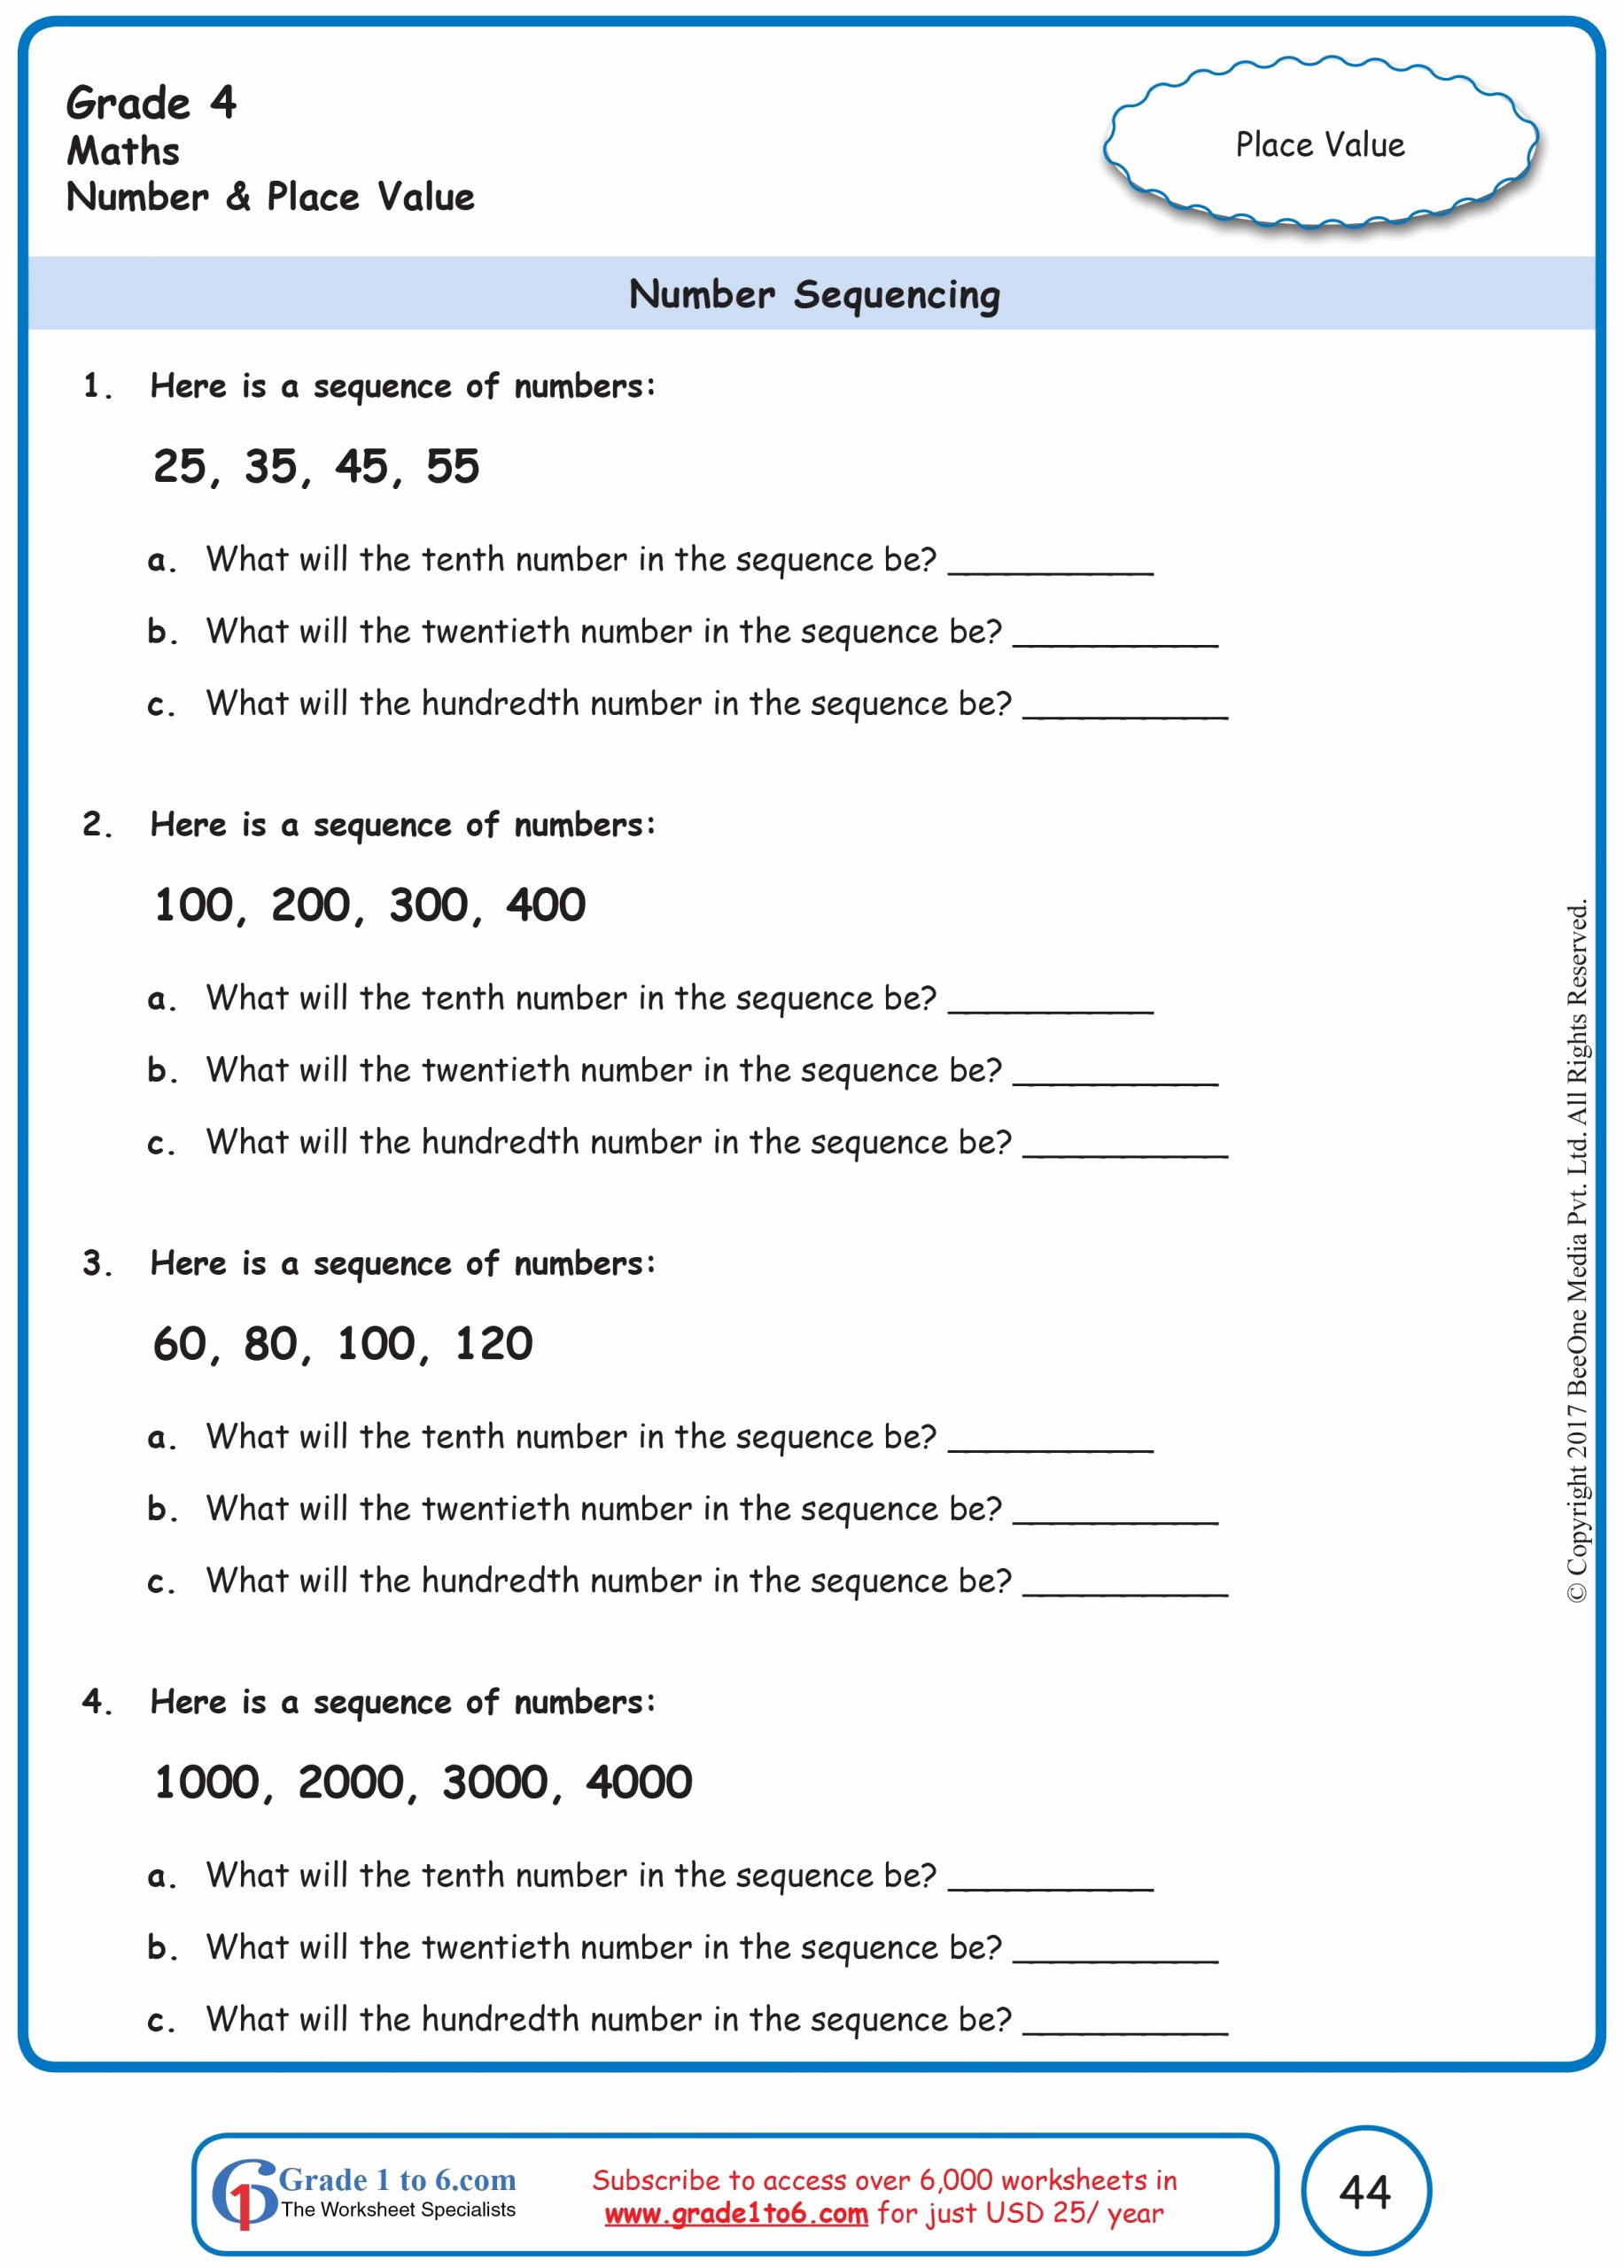 Sequencing Worksheets 4th Grade Elegant 4th Grade Sequencing Worksheets